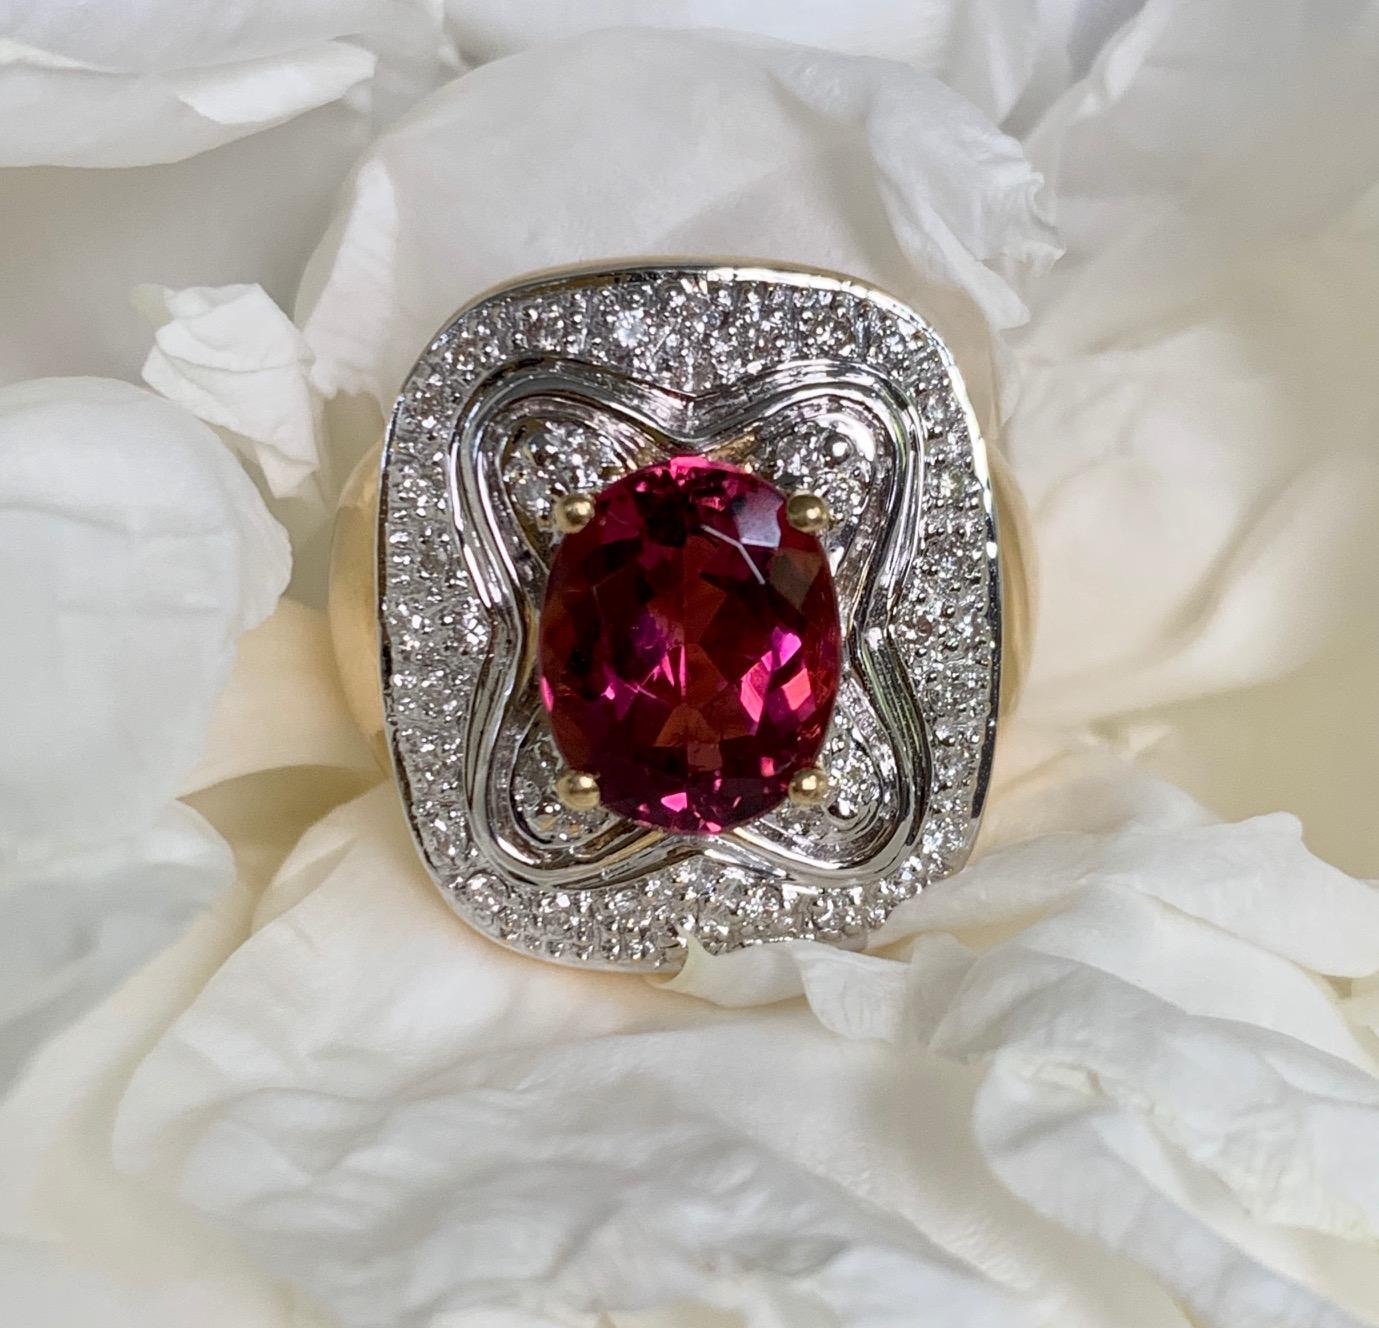 Modern Rubellite Pink Tourmaline 18 Karat Gold Ring - Size 6 In Excellent Condition For Sale In St. Louis Park, MN